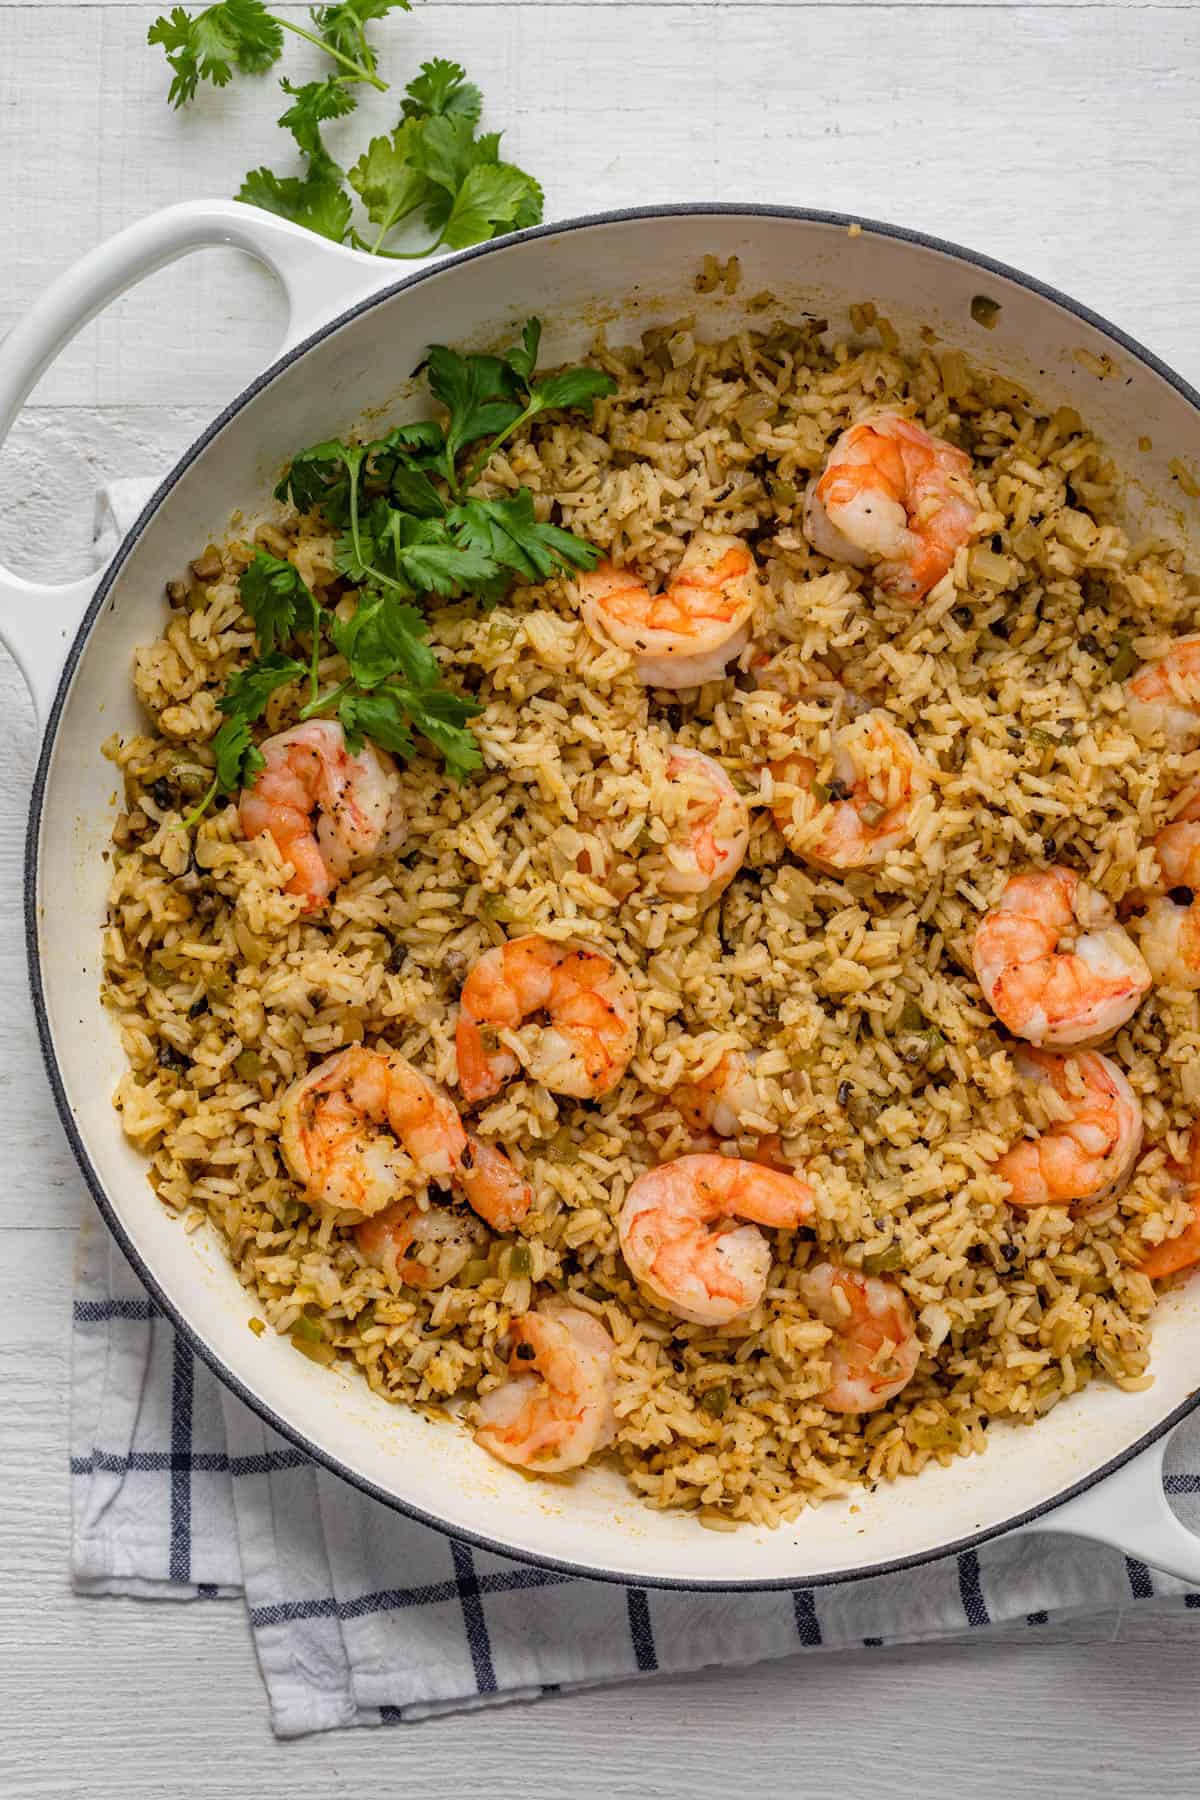 https://feelgoodfoodie.net/wp-content/uploads/2020/08/One-Pan-Shrimp-and-Rice-9.jpg